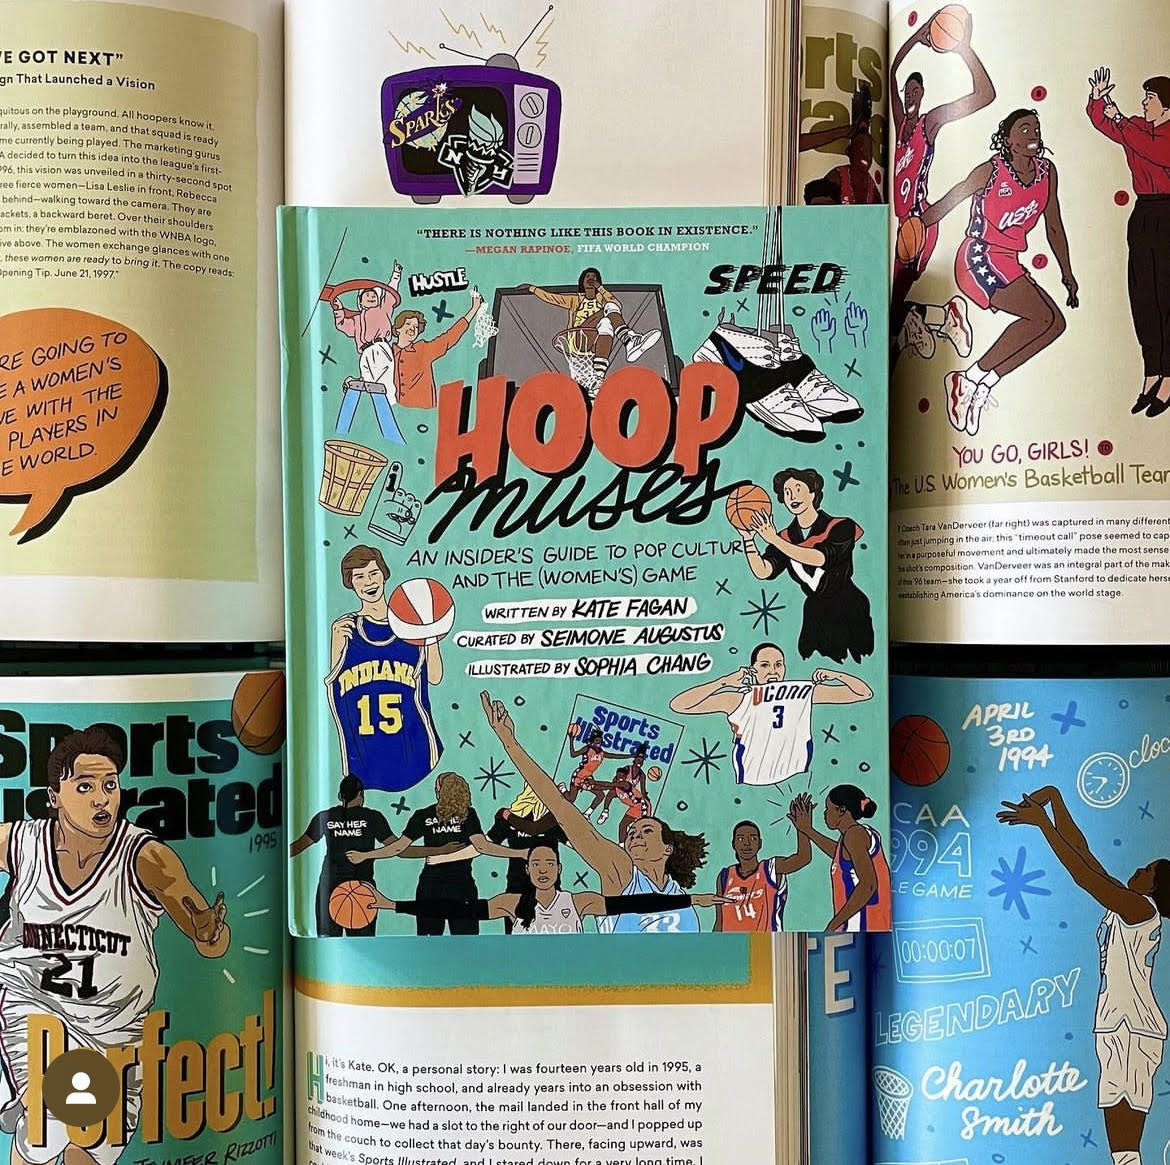 a warm welcome to all the fresh women's basketball fans. did this book, Hoop Muses, with @seimoneaugustus & @esymai -- makes a perfect gift for any age. Signed copies at my local bookstore at the link below. 🔥🏀📈 thevillagebookseller.com/item/1iqMaW6sr…